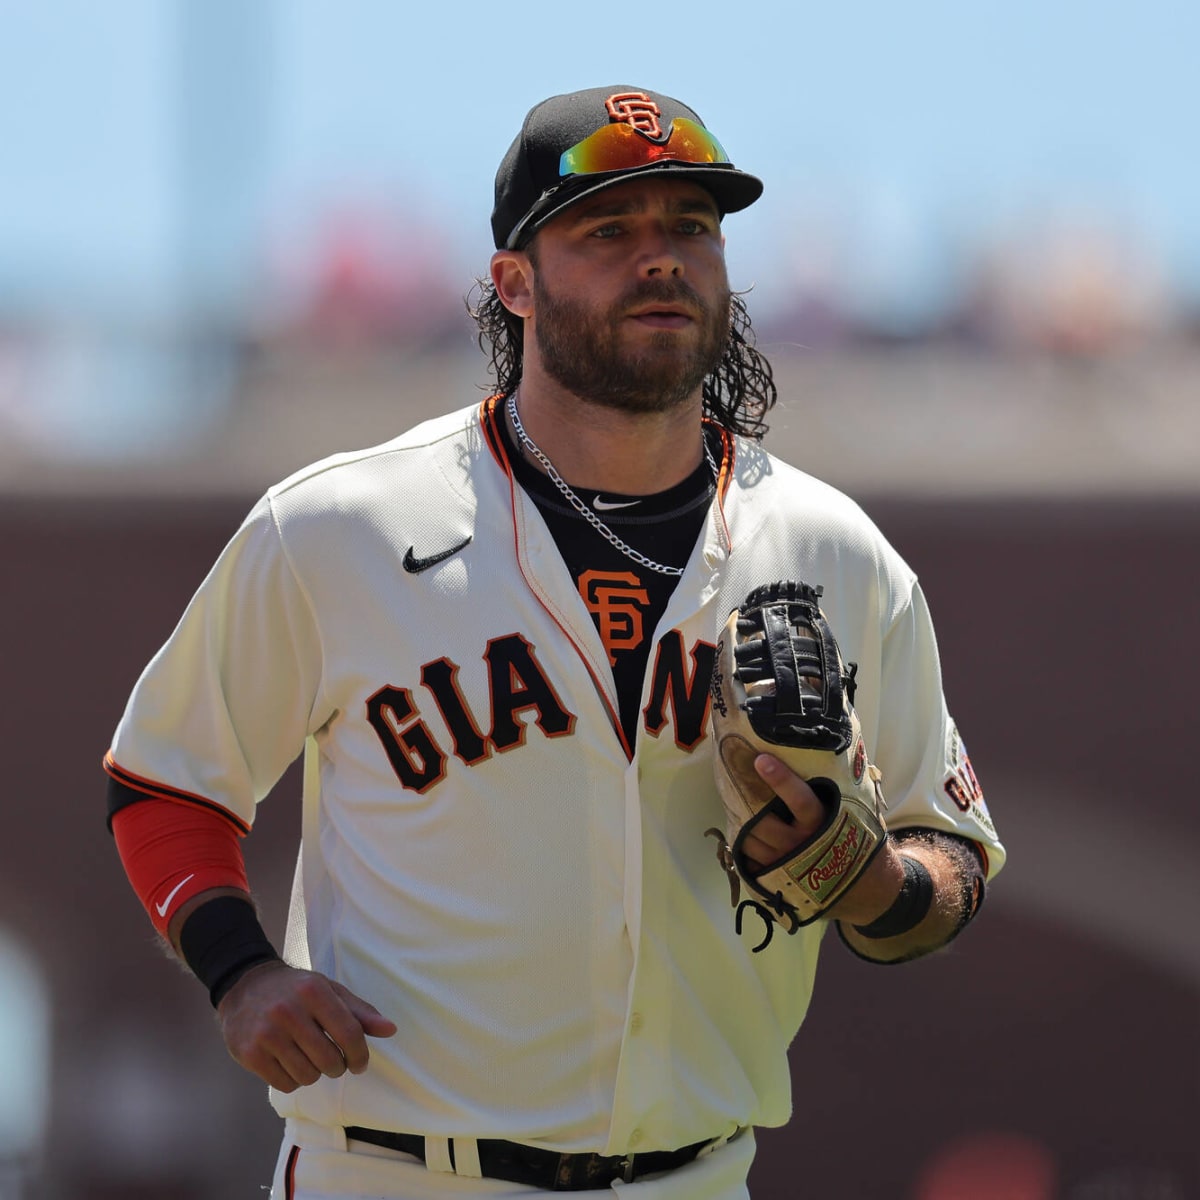 Giants' All-Star Brandon Crawford could return to lineup this weekend